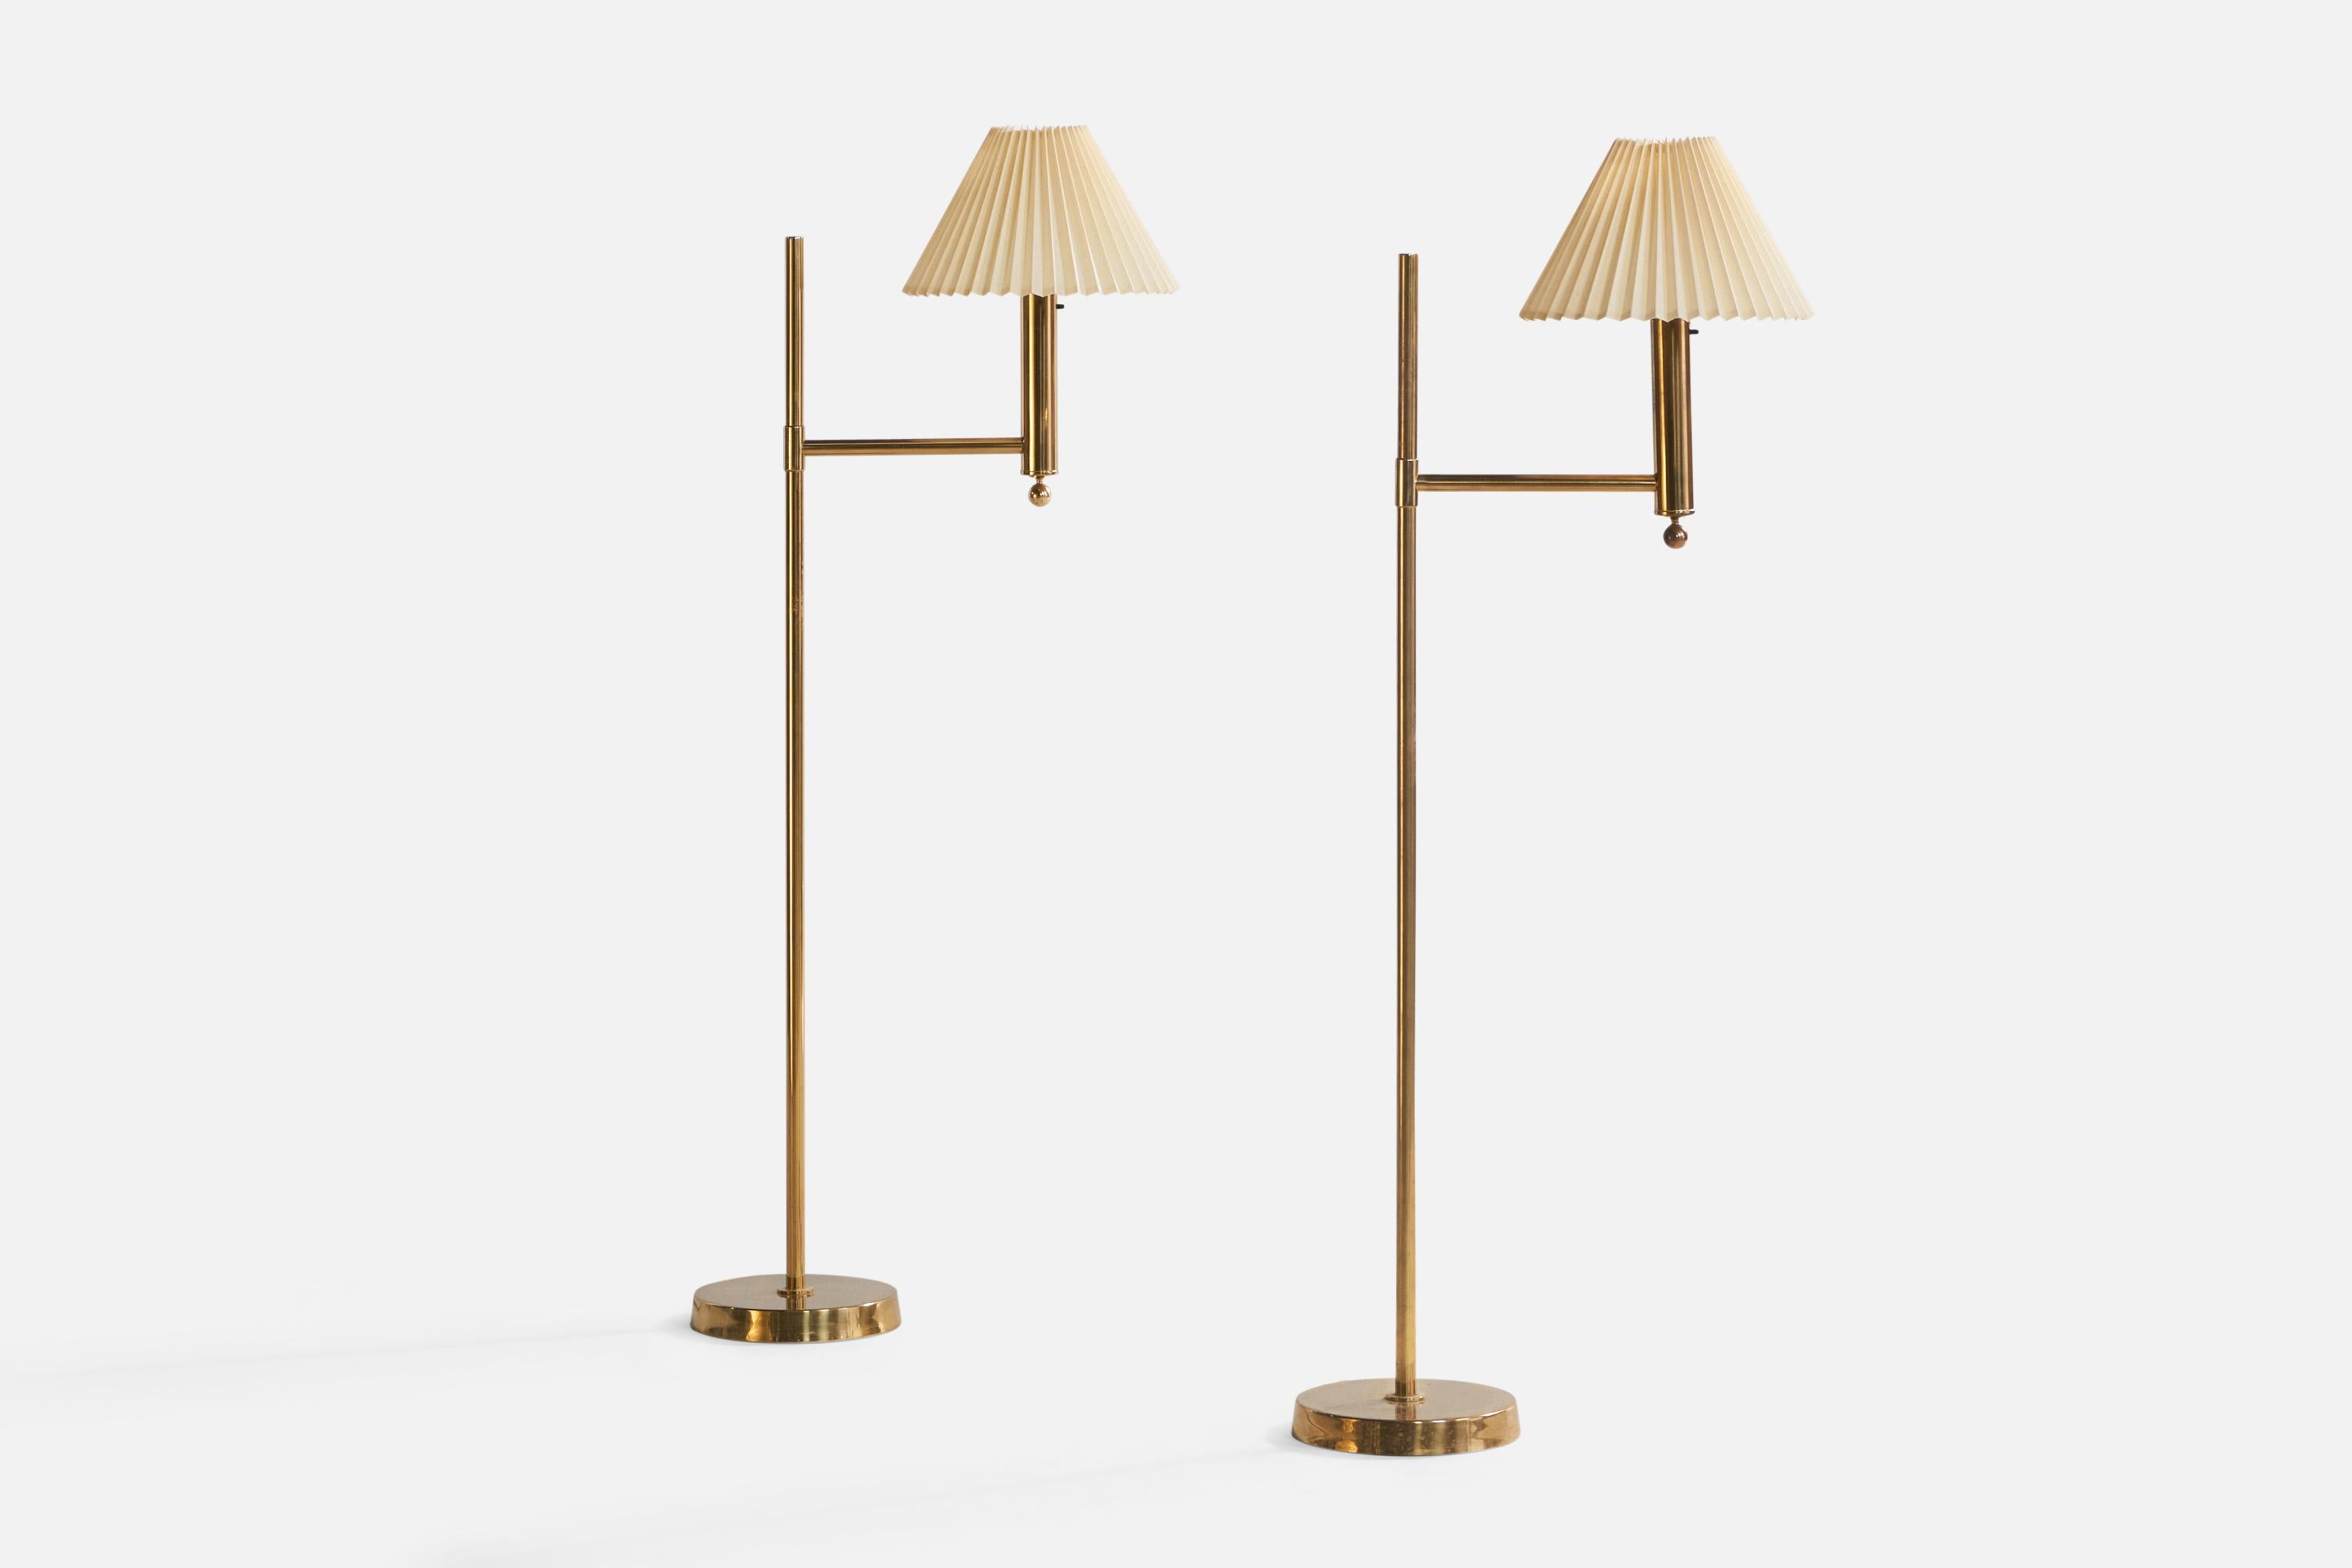 A pair of brass and beige fabric floor lamps designed and produced by Bergboms, Sweden, 1960s.

Overall Dimensions (inches): 51.5” H x 12” W x 21.25” Depth. Stated dimensions include shade.
Bulb Specifications: E-26 Bulbs
Number of Sockets: 2
All